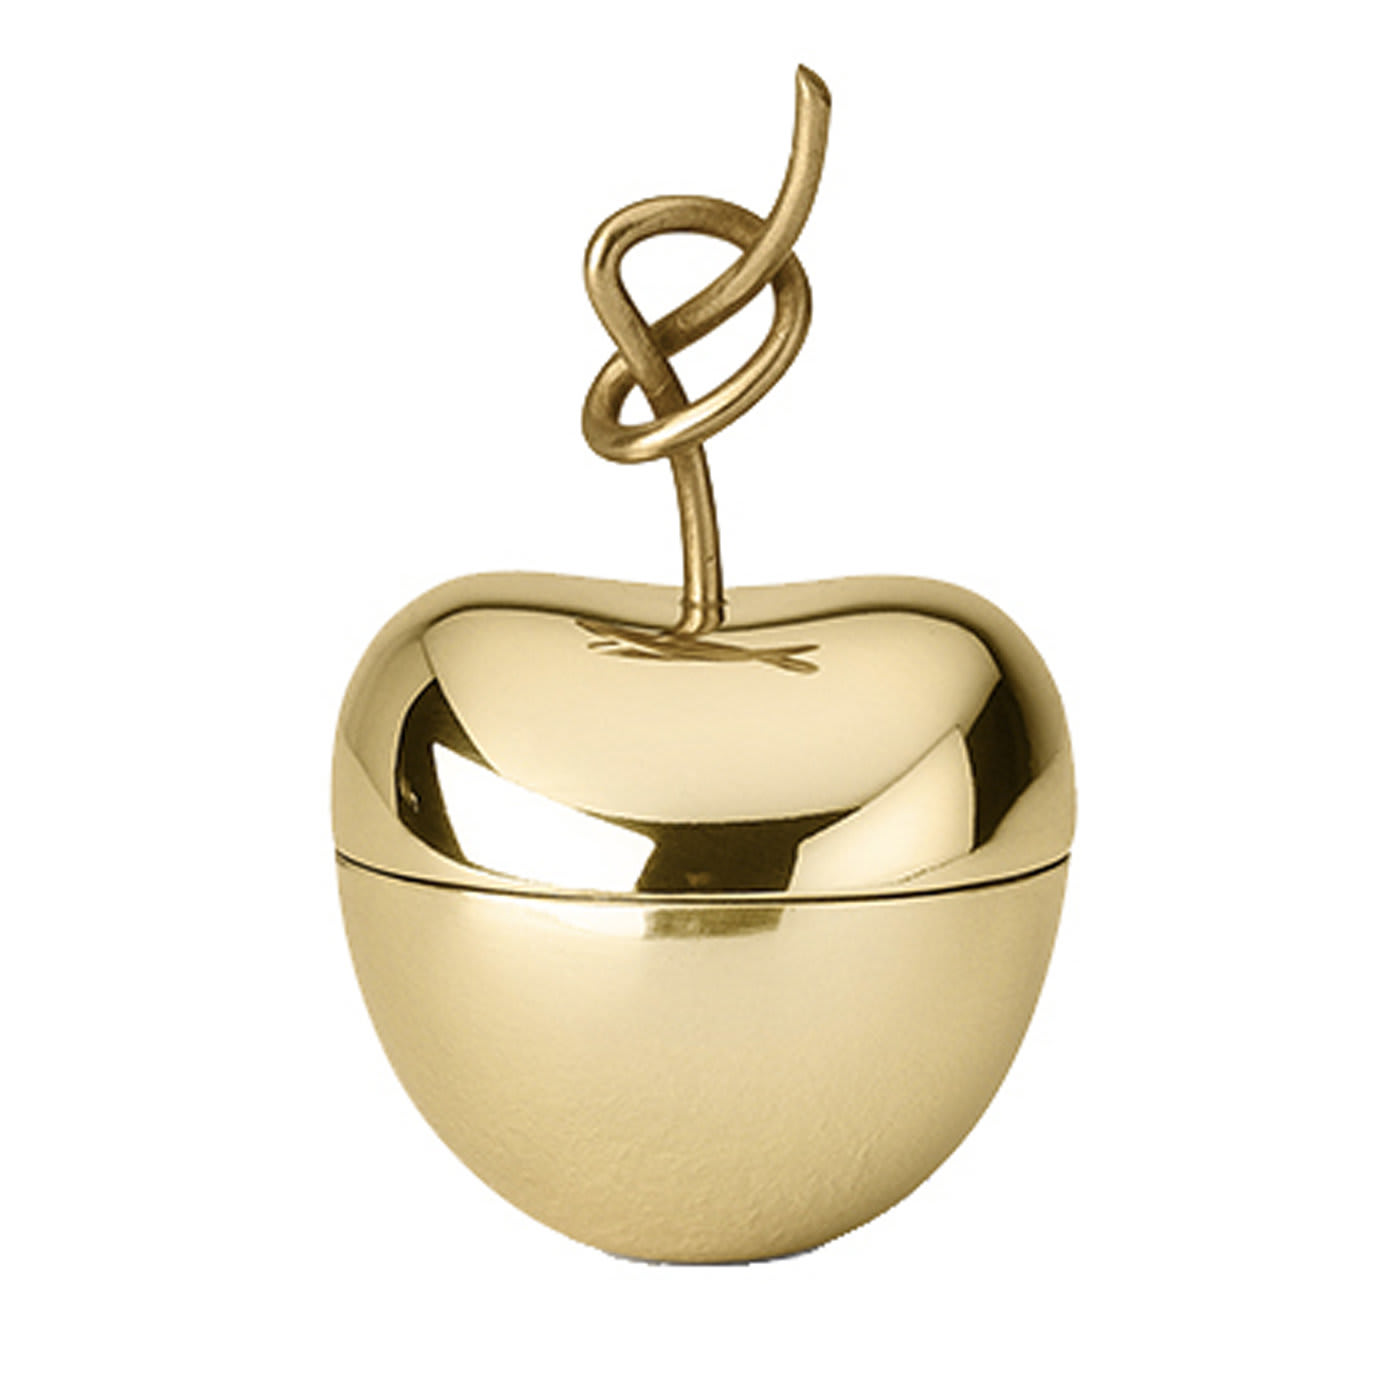 Knotted Cherry Small Box in Brass By Nika Zupanc - Ghidini 1961